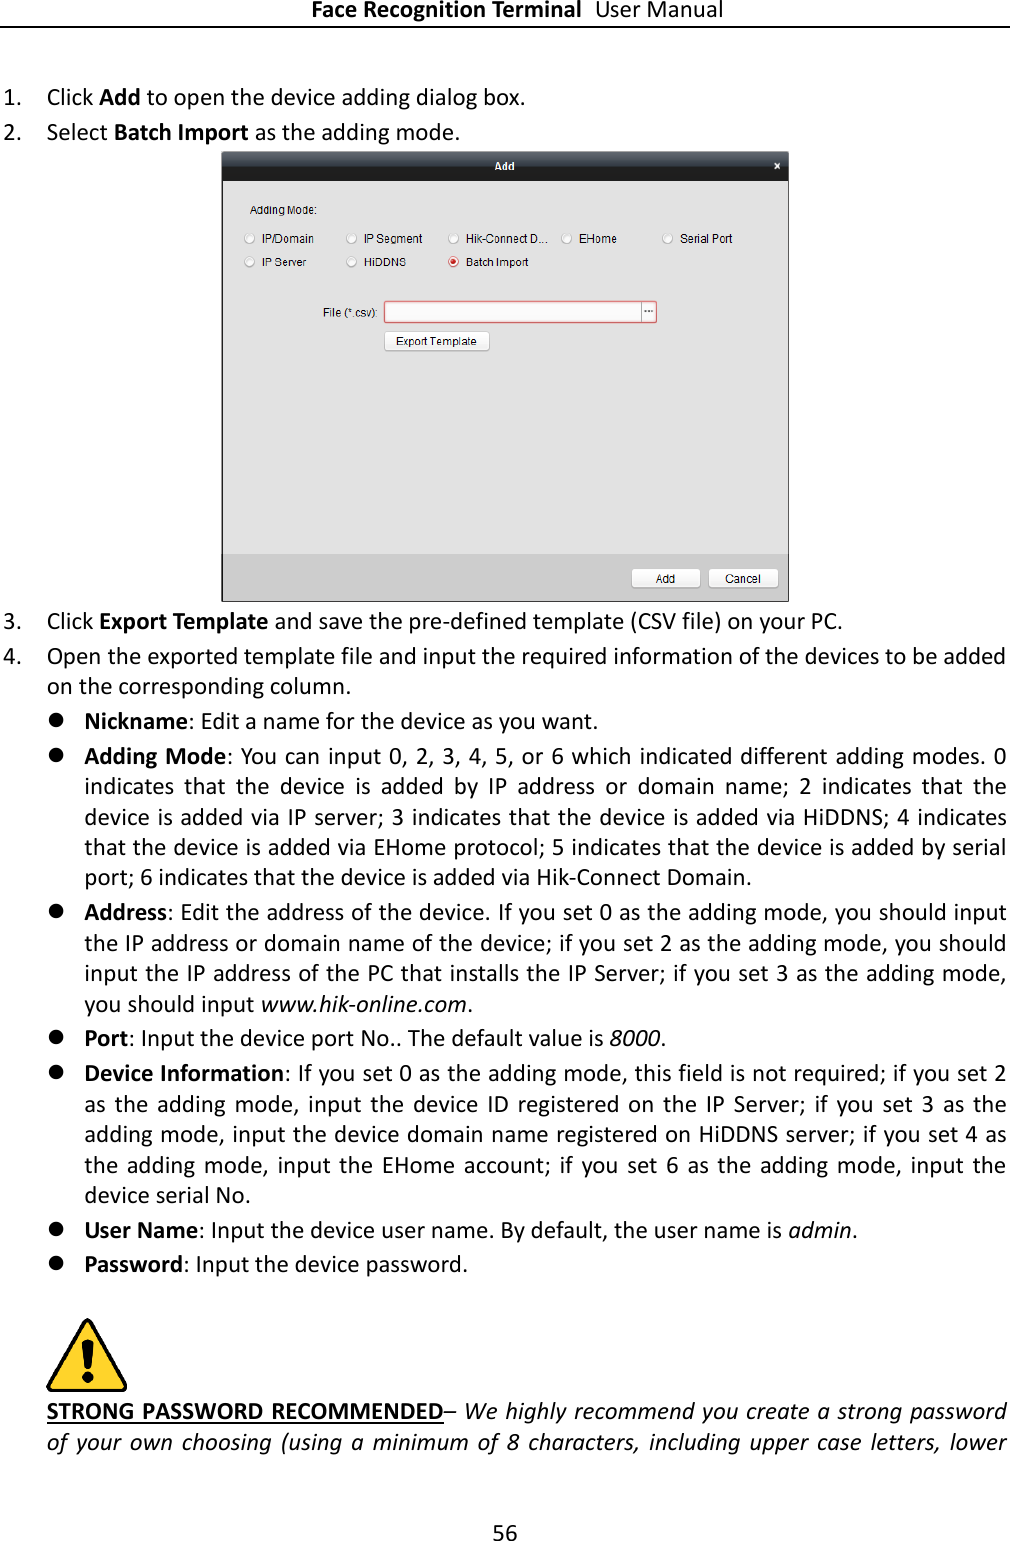 Face Recognition Terminal User Manual 56  1. Click Add to open the device adding dialog box. 2. Select Batch Import as the adding mode.  3. Click Export Template and save the pre-defined template (CSV file) on your PC. 4. Open the exported template file and input the required information of the devices to be added on the corresponding column.  Nickname: Edit a name for the device as you want.  Adding Mode: You can input 0, 2, 3, 4, 5, or 6 which indicated different adding modes. 0 indicates  that  the  device  is  added  by  IP  address  or  domain  name;  2  indicates  that  the device is added via IP server; 3 indicates that the device is added via HiDDNS; 4 indicates that the device is added via EHome protocol; 5 indicates that the device is added by serial port; 6 indicates that the device is added via Hik-Connect Domain.  Address: Edit the address of the device. If you set 0 as the adding mode, you should input the IP address or domain name of the device; if you set 2 as the adding mode, you should input the IP address of the PC that installs the IP Server; if you set 3 as the adding mode, you should input www.hik-online.com.  Port: Input the device port No.. The default value is 8000.  Device Information: If you set 0 as the adding mode, this field is not required; if you set 2 as  the  adding  mode, input  the  device  ID  registered on  the  IP  Server;  if  you  set  3  as  the adding mode, input the device domain name registered on HiDDNS server; if you set 4 as the  adding mode,  input the  EHome  account;  if  you  set  6  as  the  adding mode,  input  the device serial No.  User Name: Input the device user name. By default, the user name is admin.  Password: Input the device password.   STRONG PASSWORD RECOMMENDED– We highly recommend you create a strong password of  your  own  choosing  (using  a  minimum  of  8  characters, including upper  case  letters,  lower 